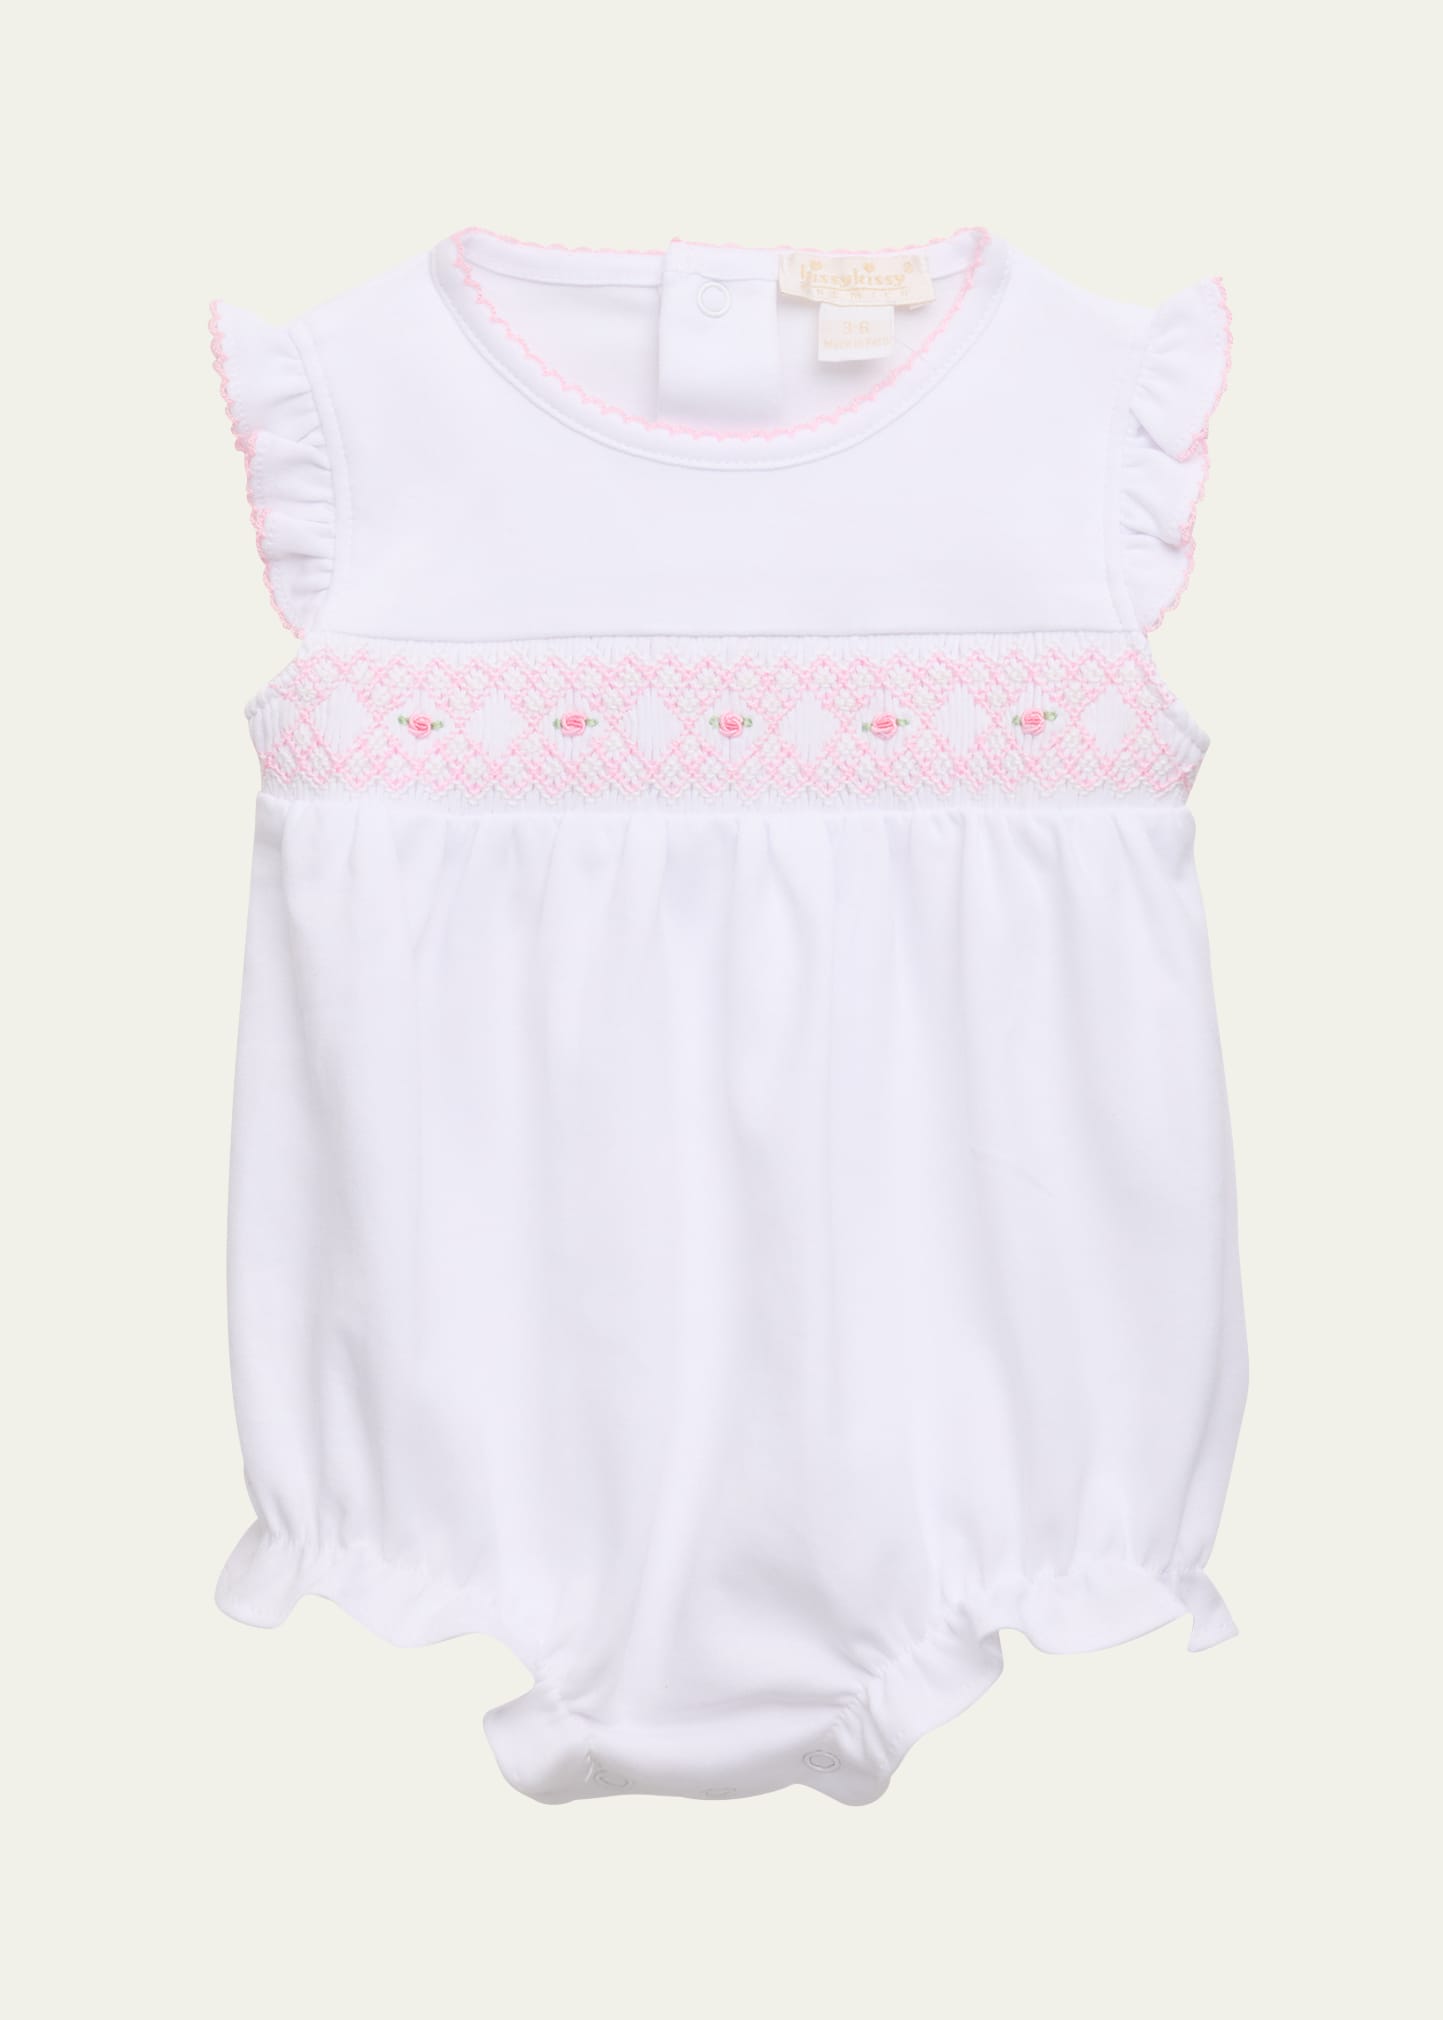 Girl's Hand-Smocked Bubble Playsuit, Size Newborn-9M